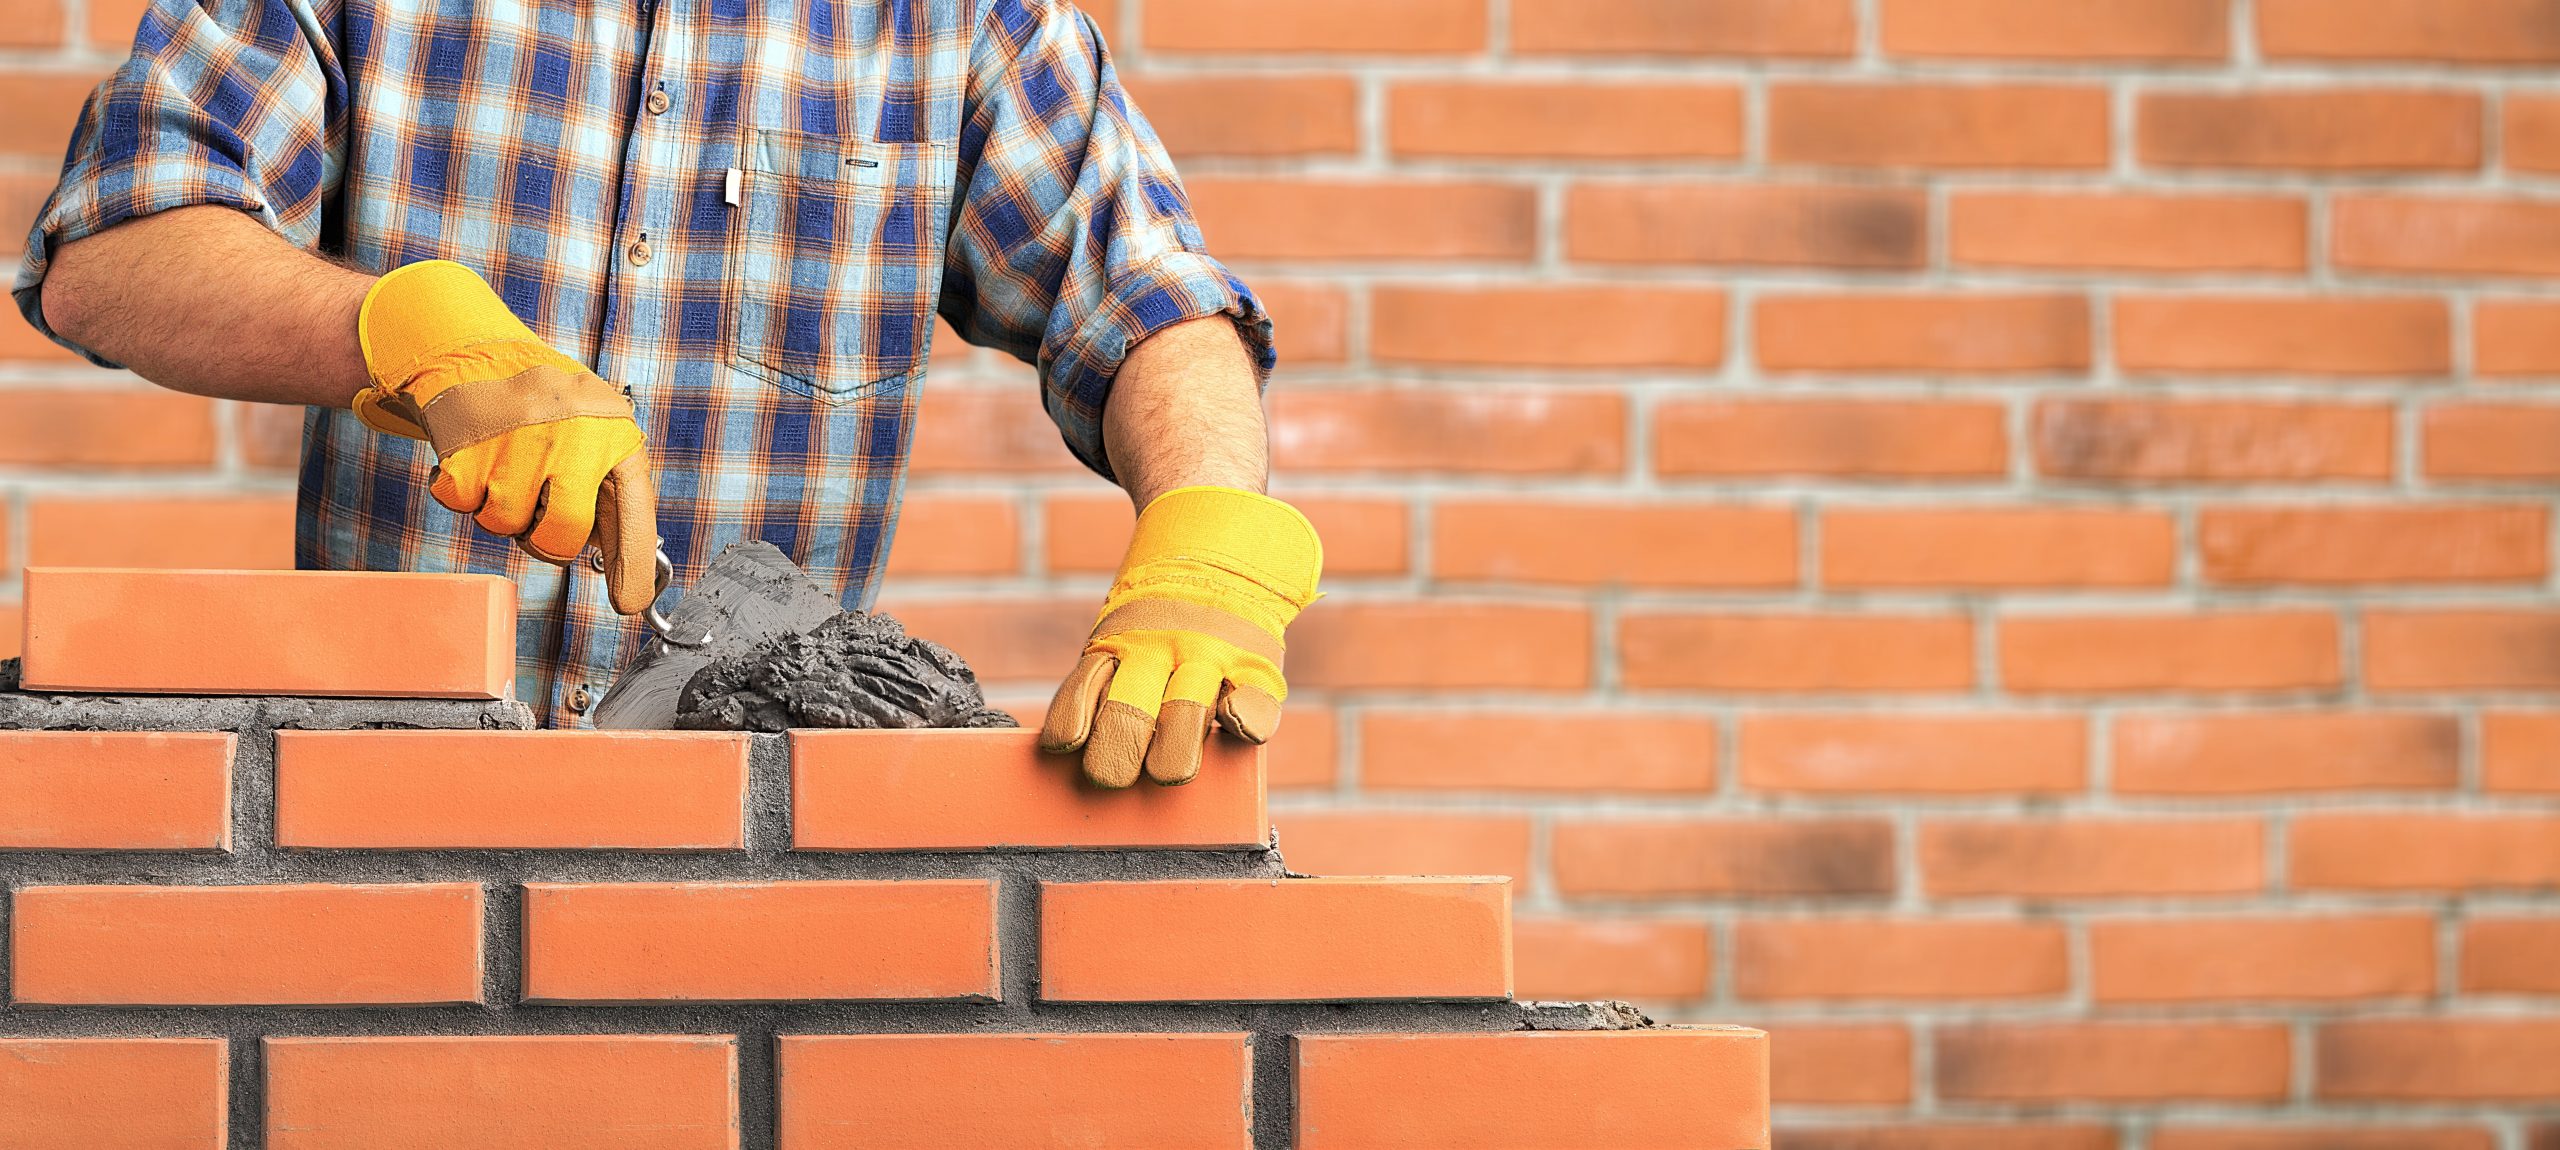 TIPS FOR CHOOSING A GOOD MASONRY & Brick Pointing CONTRACTOR